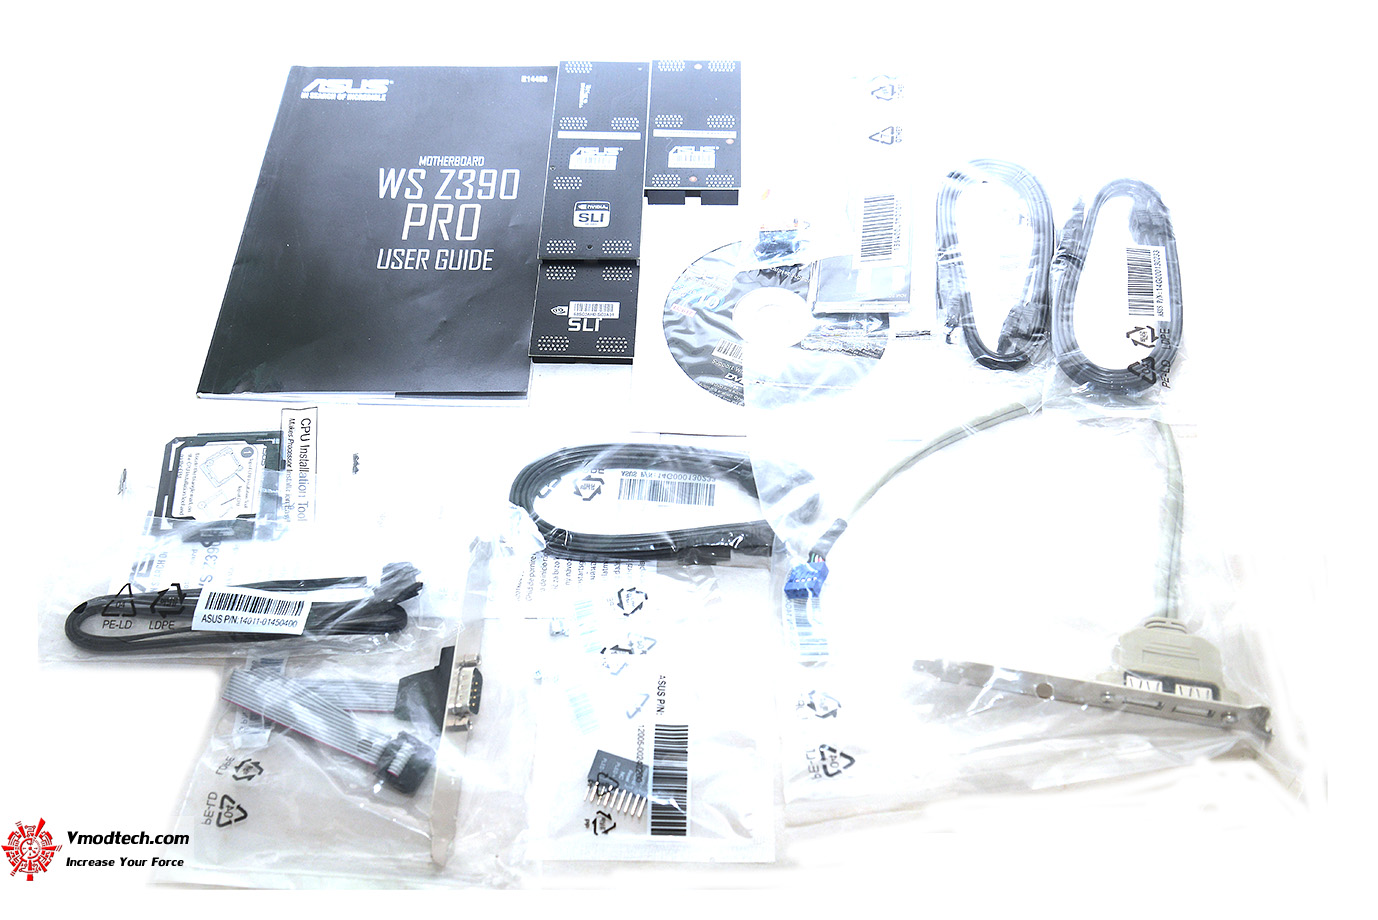 dsc 1278 ASUS WS Z390 PRO Servers & Workstations Motherboard Review